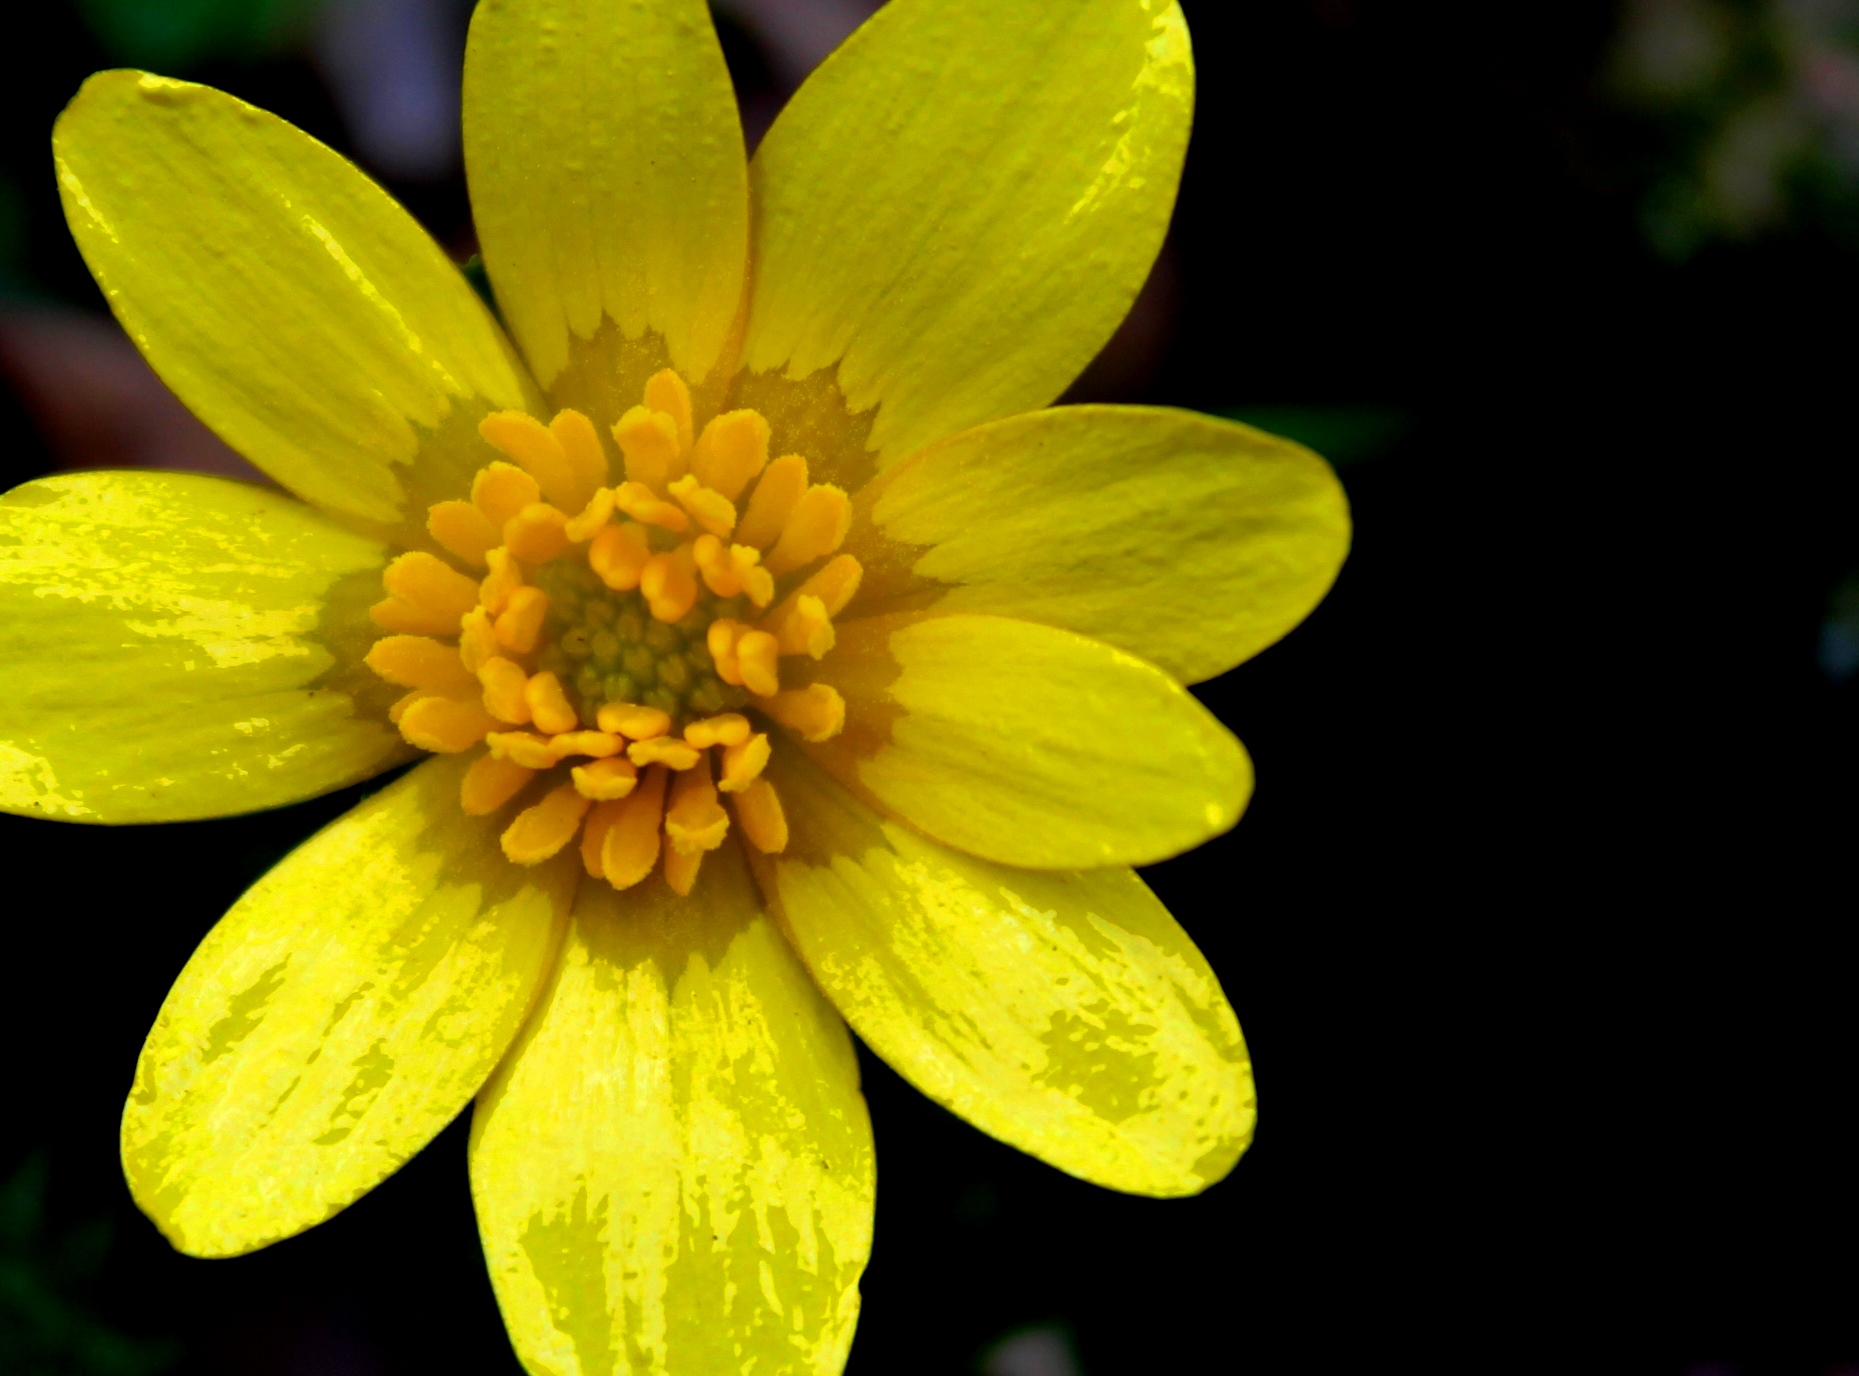 a bright yellow flower is shown against a black background